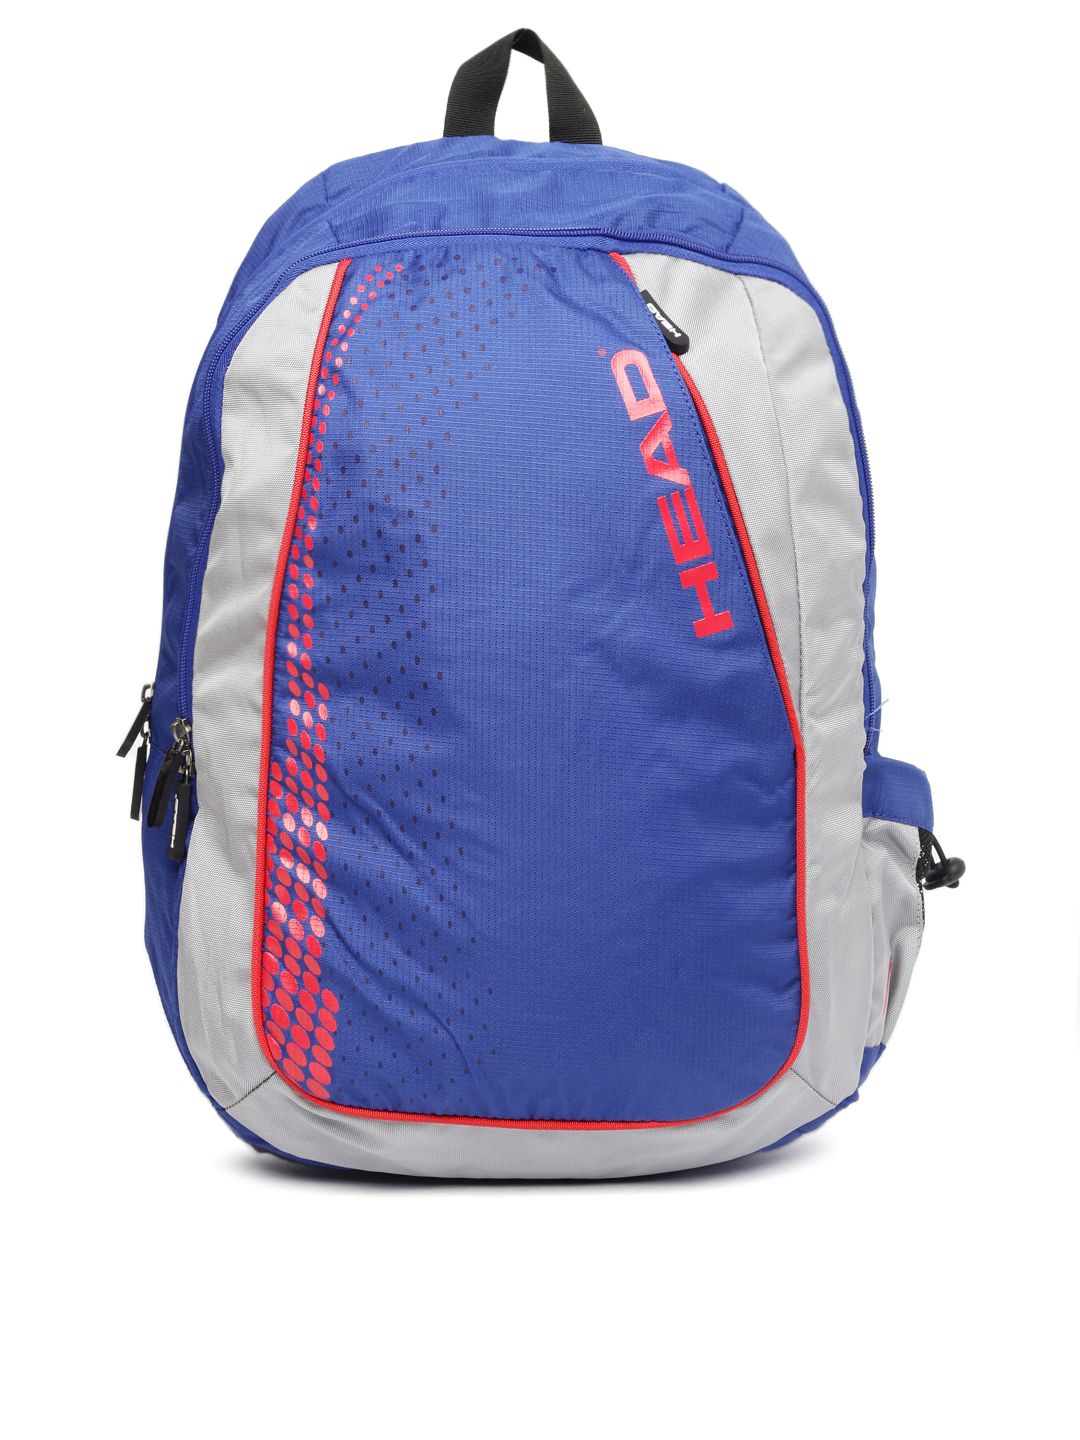 Head Unisex Blue & Grey Colourblocked Backpack Price in India